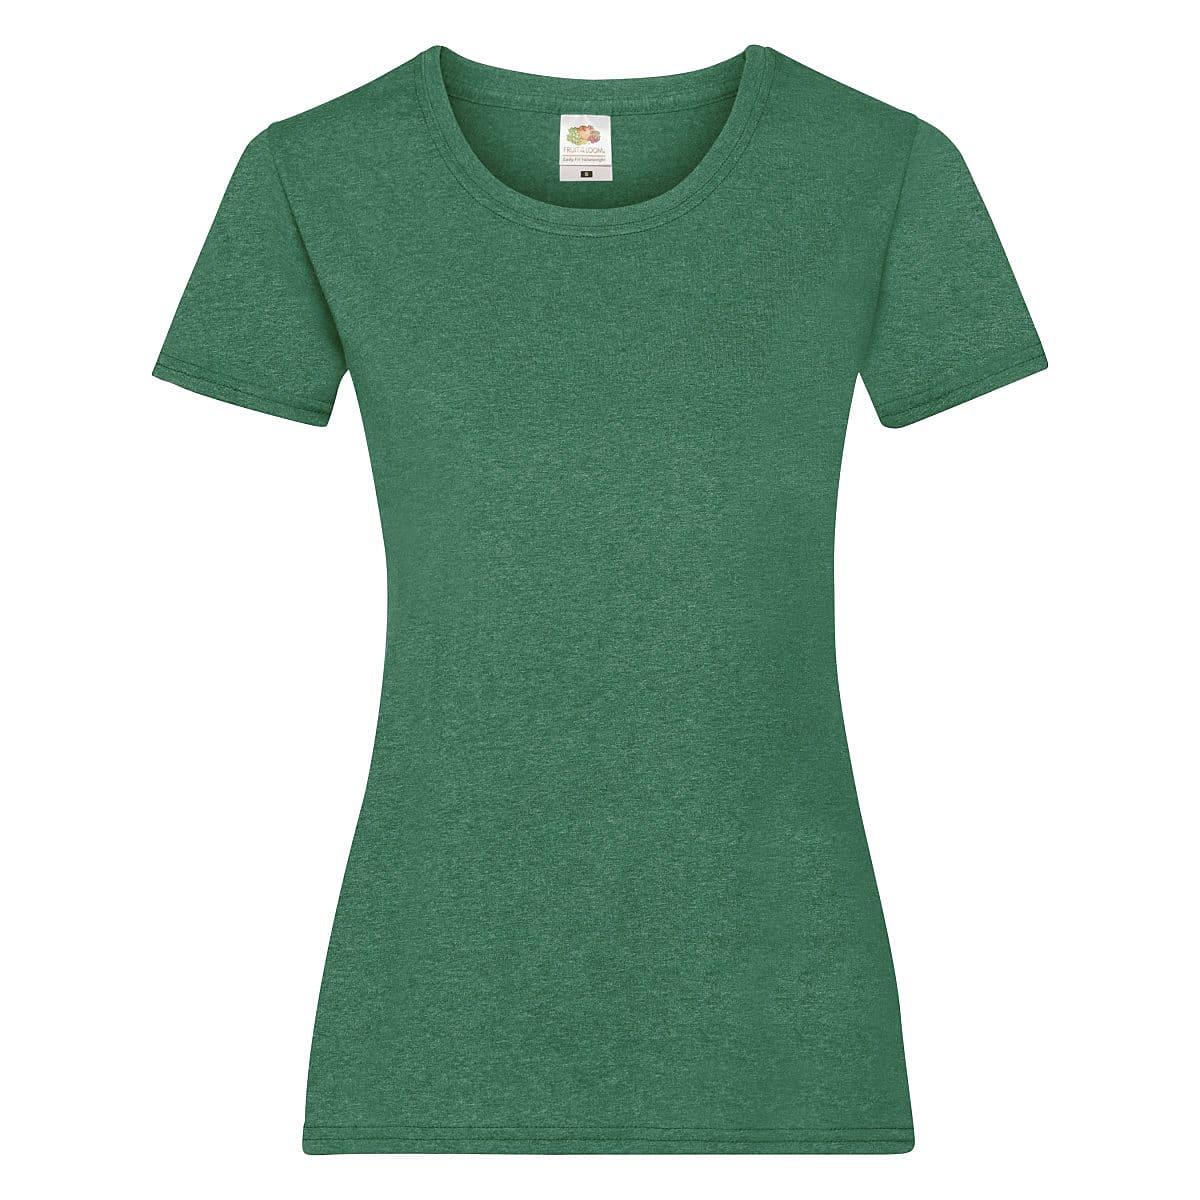 Fruit Of The Loom Lady-Fit Valueweight T-Shirt in Retro Heather Green (Product Code: 61372)